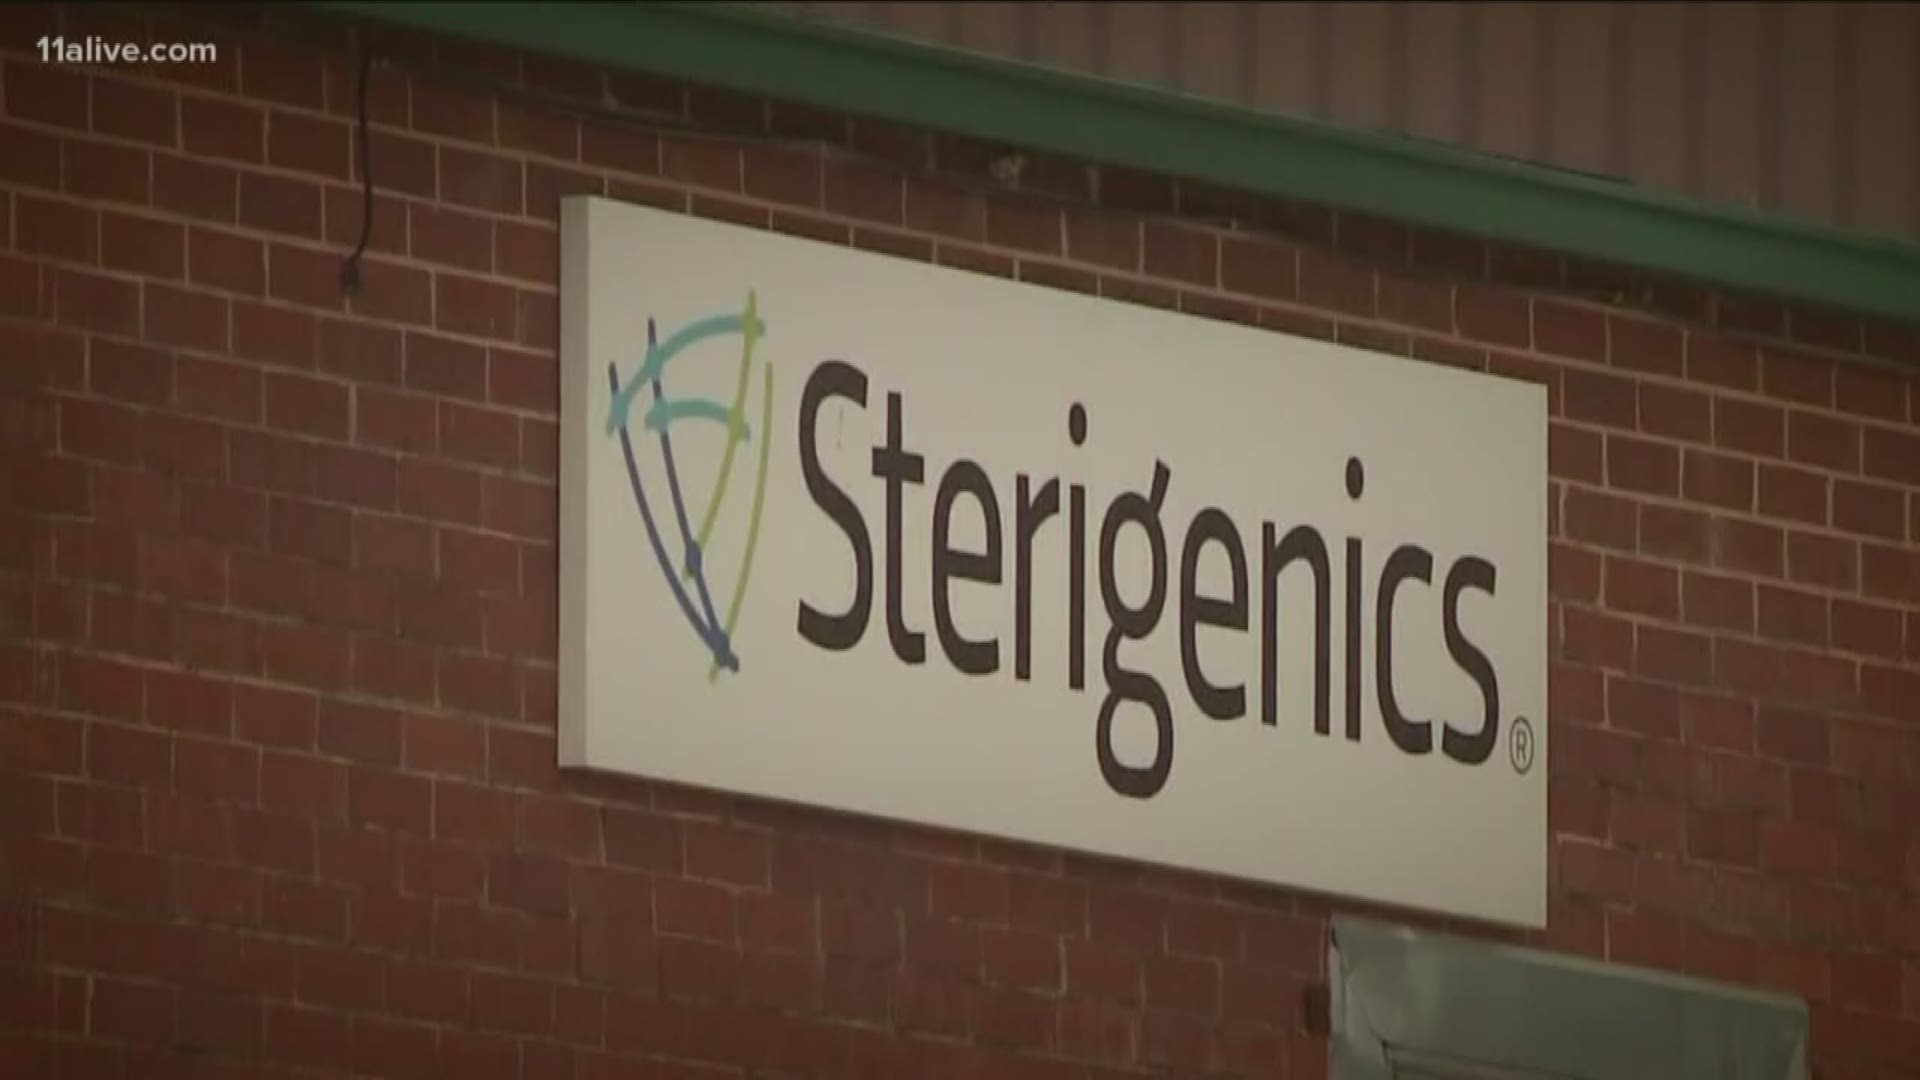 The plan, which is by Sterigenics, is to install new anti-pollution controls. Construction should be completed in 12 to 24 weeks.